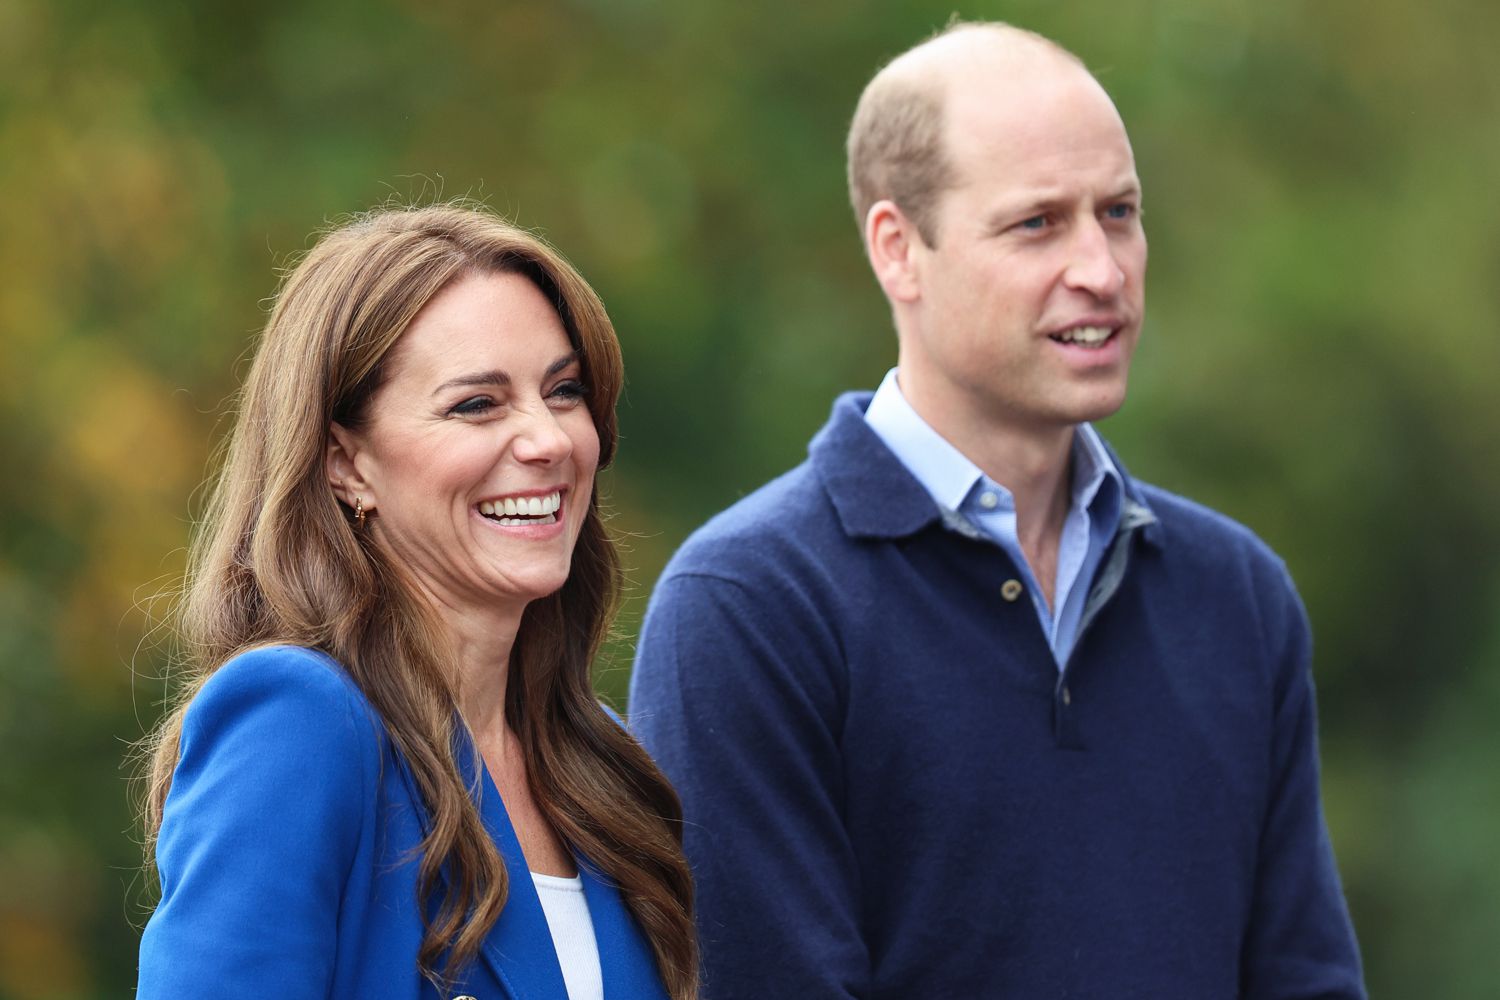 Prince William wearing a blue sweater and Kate Middleton wearing a blue coat